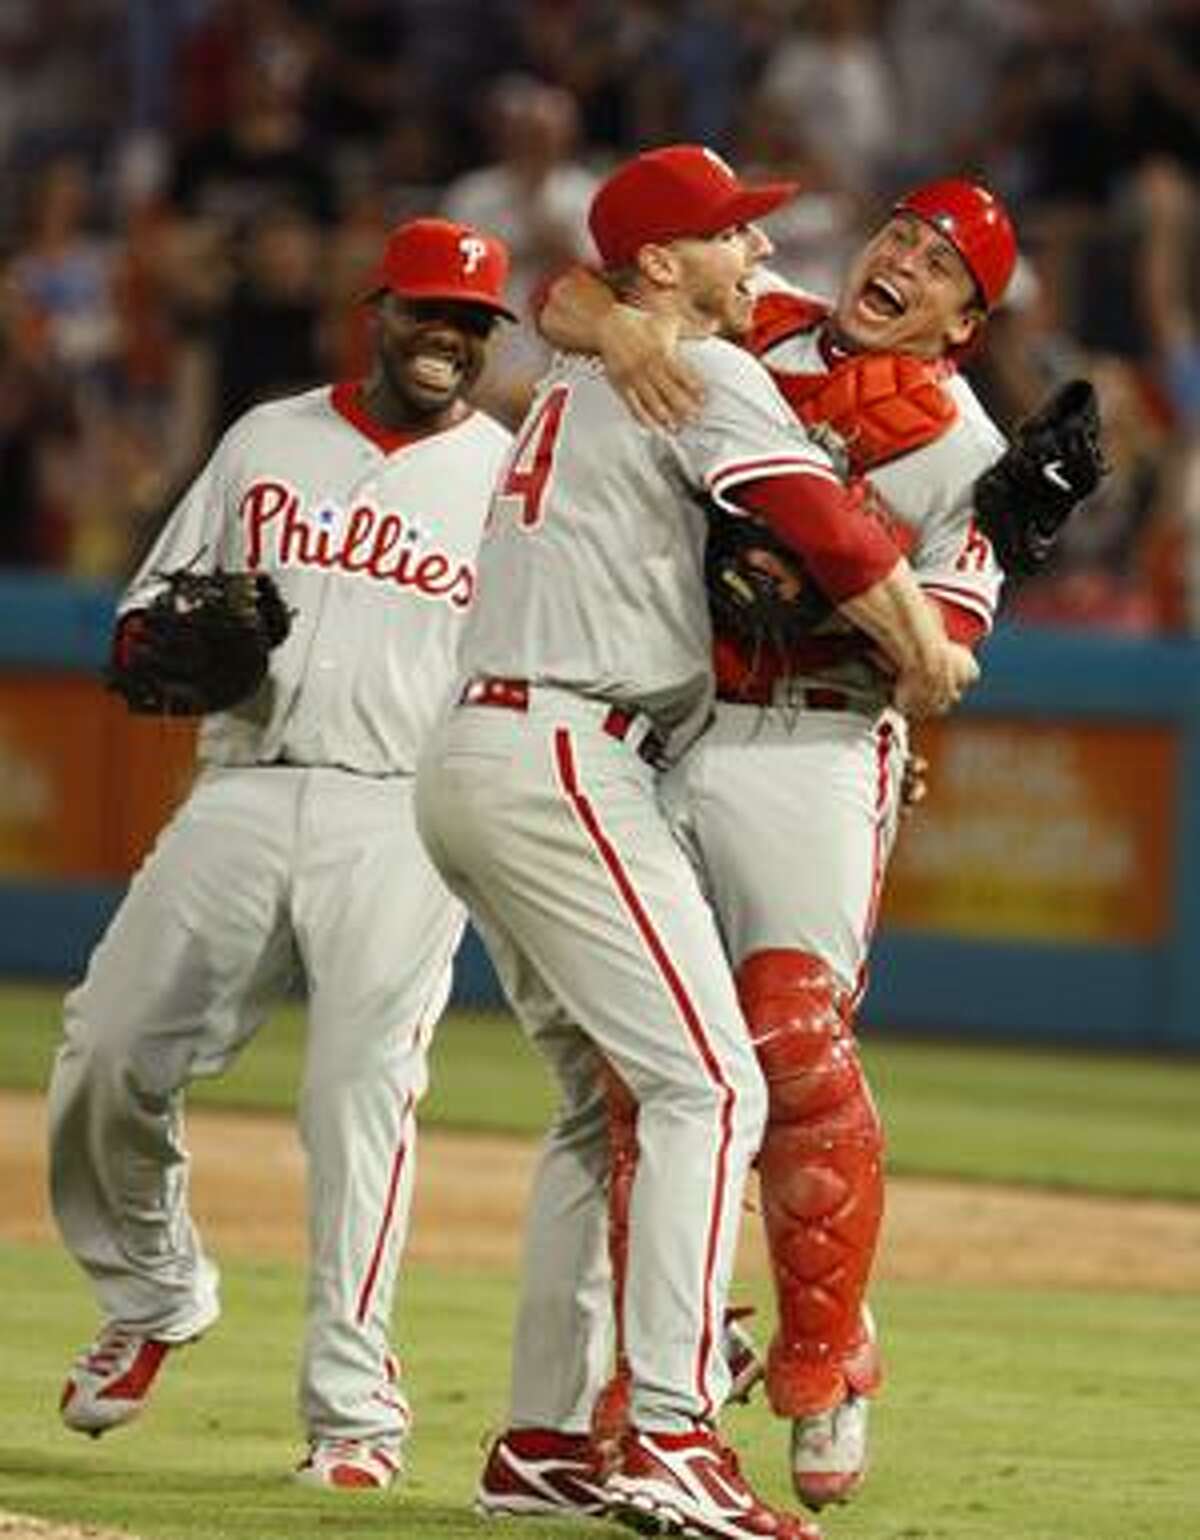 Philadelphia Phillies starting pitcher Roy Halladay, center, celebrates with Carlos Ruiz, right, and Ryan Howard after Halladay threw a perfect game during a baseball game against the Florida Marlins, Saturday, May 29, 2010 in Miami. The Phillies defeated the Marlins 1-0. (AP Photo/Wilfredo Lee)